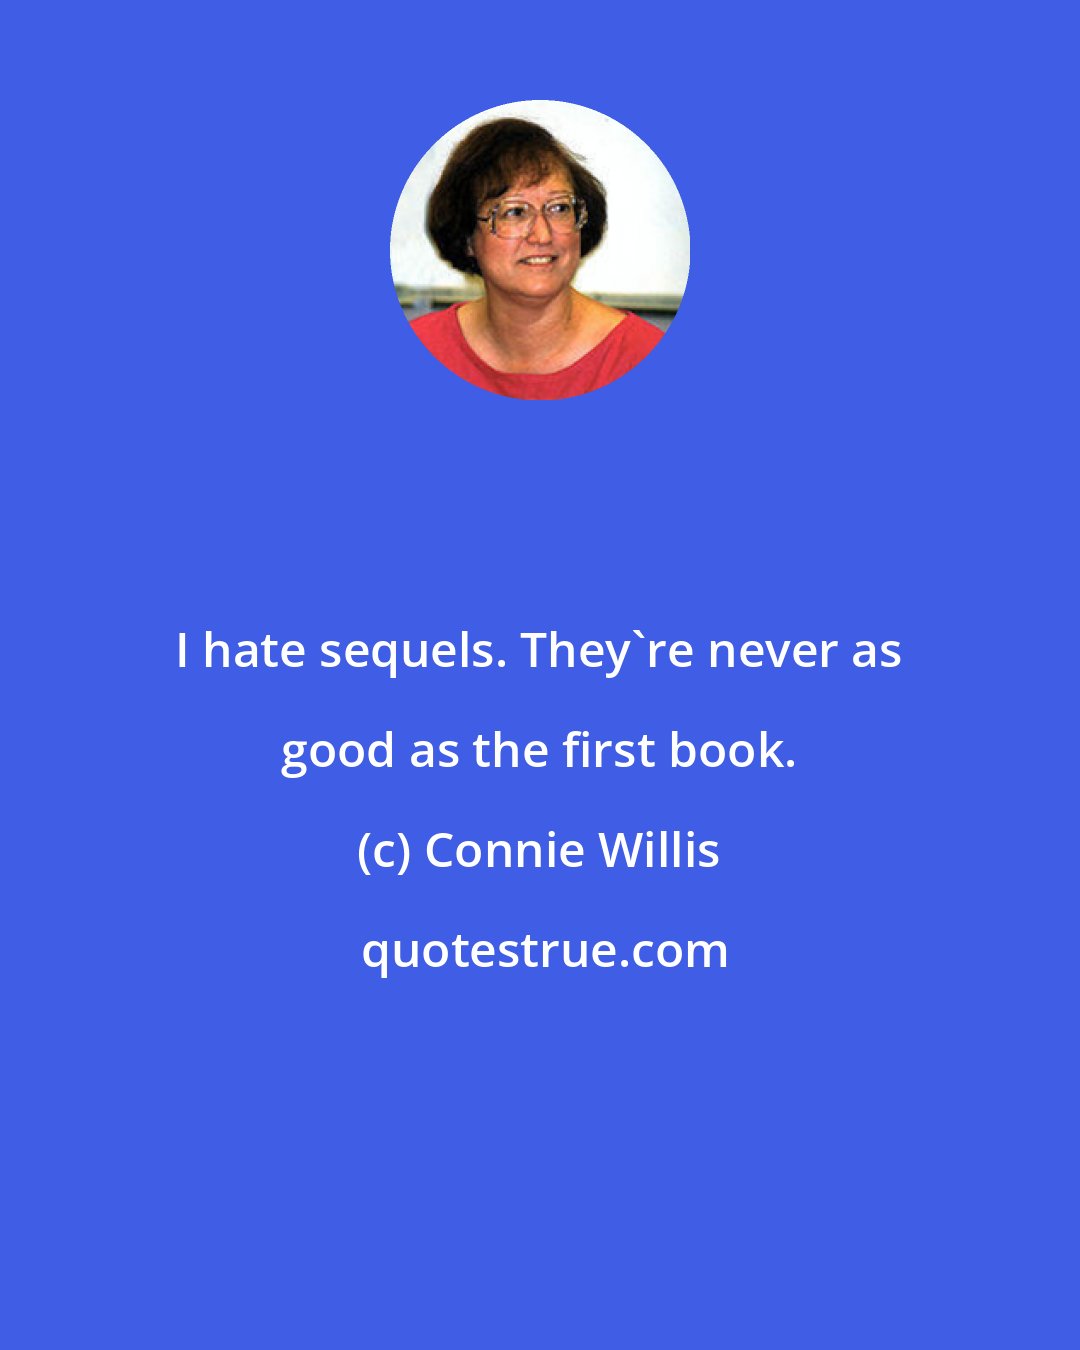 Connie Willis: I hate sequels. They're never as good as the first book.